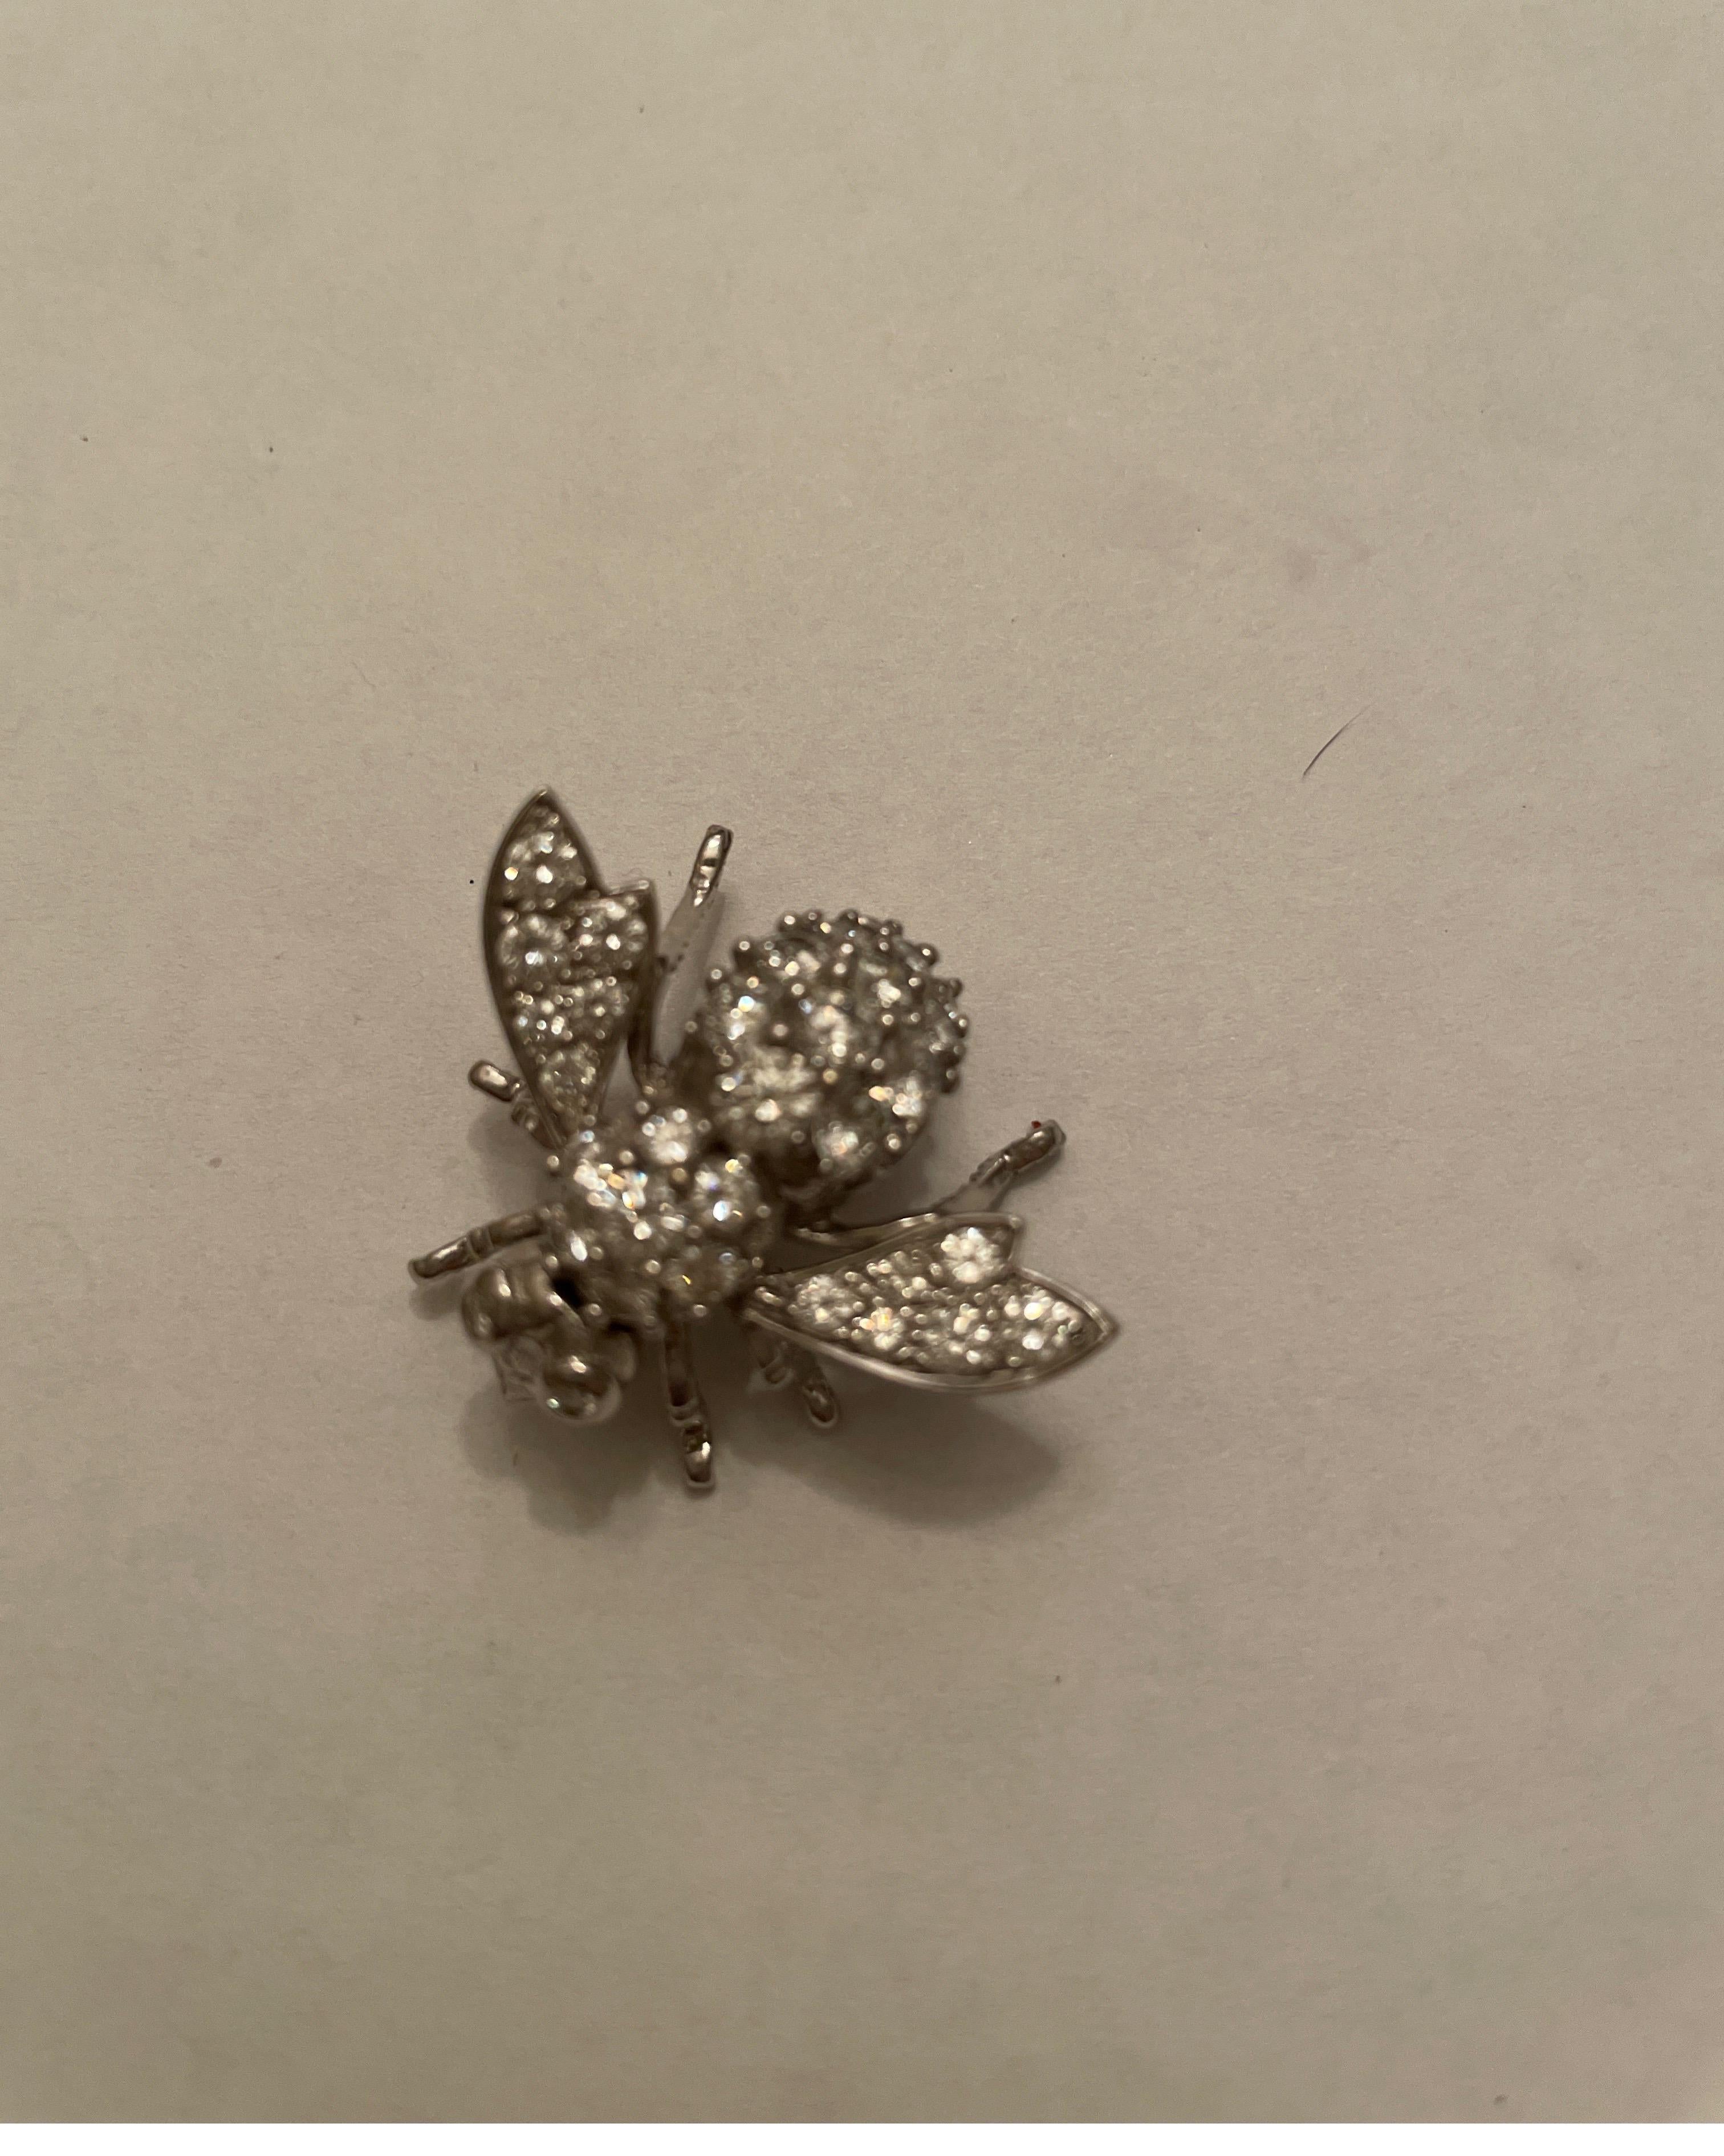 18K white gold diamond bee pin, prong set with 33 full cut round diamonds weighing 2.63cts
Last retail $9500